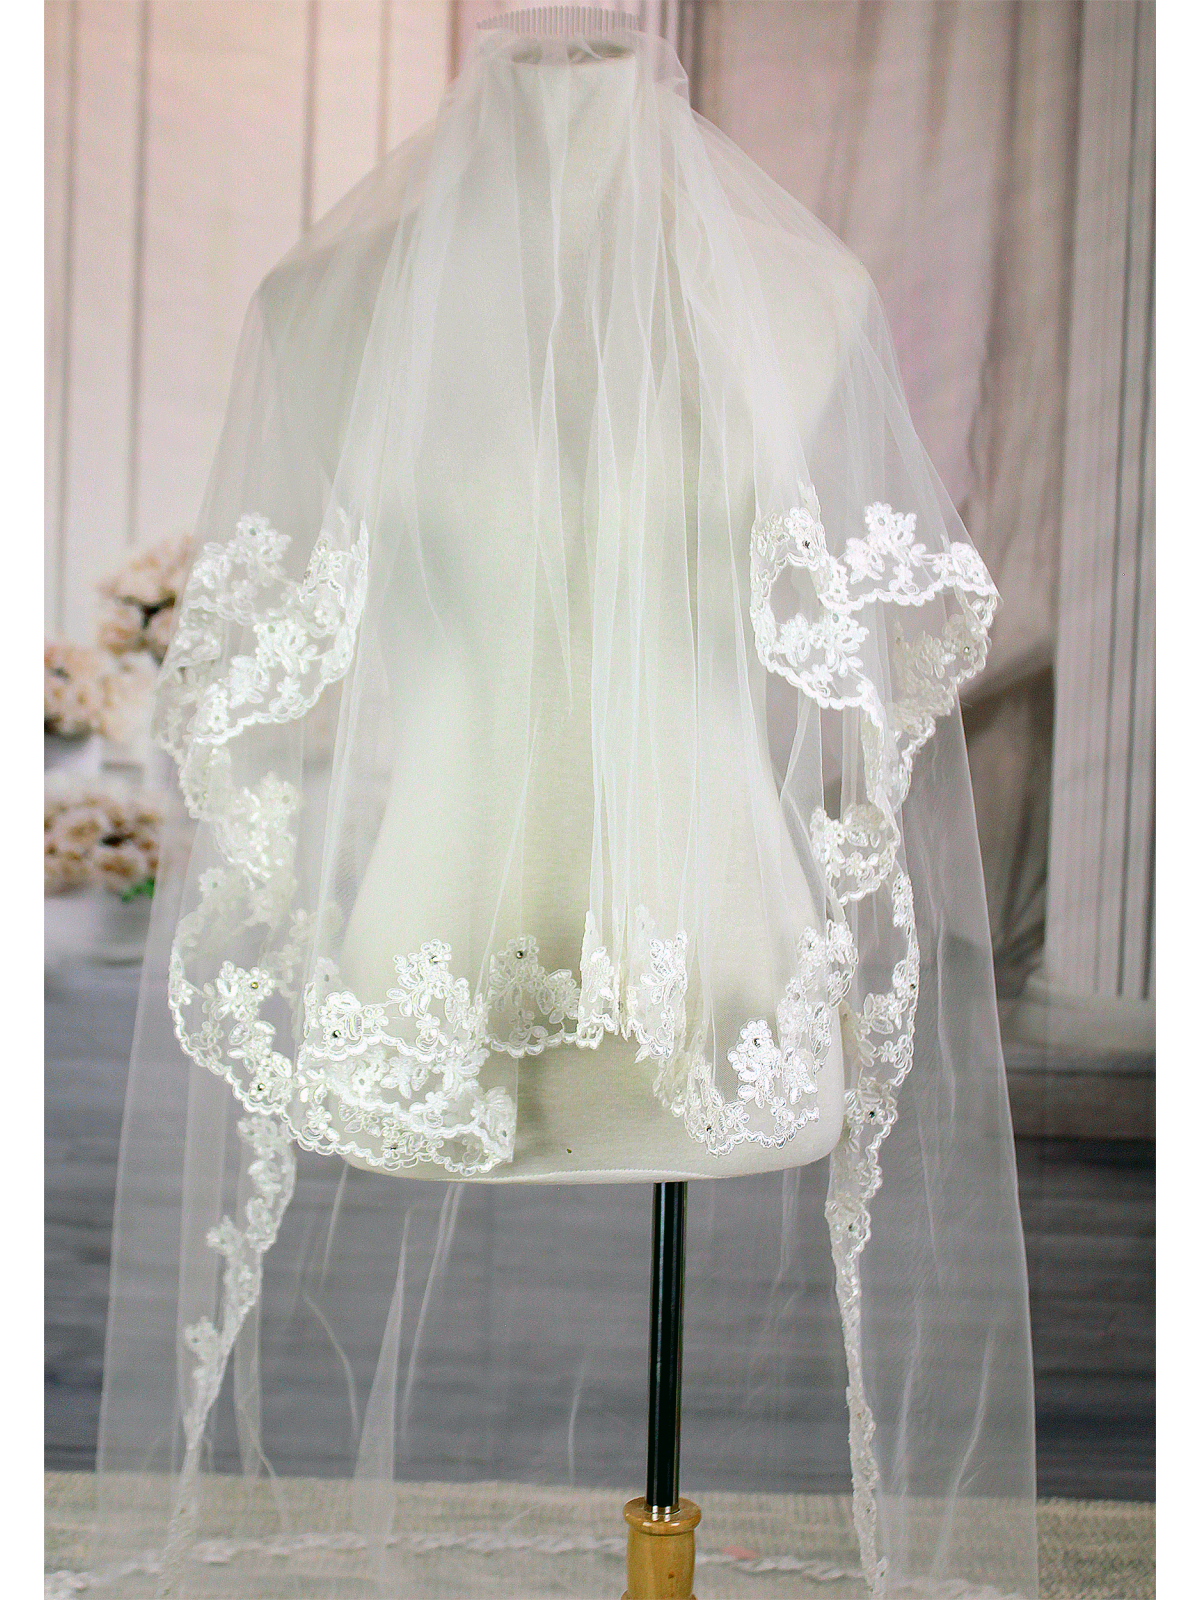 Long Veil - 2 layer with sequin & pearl embellished lace - 110" - VL-V1062-110IV